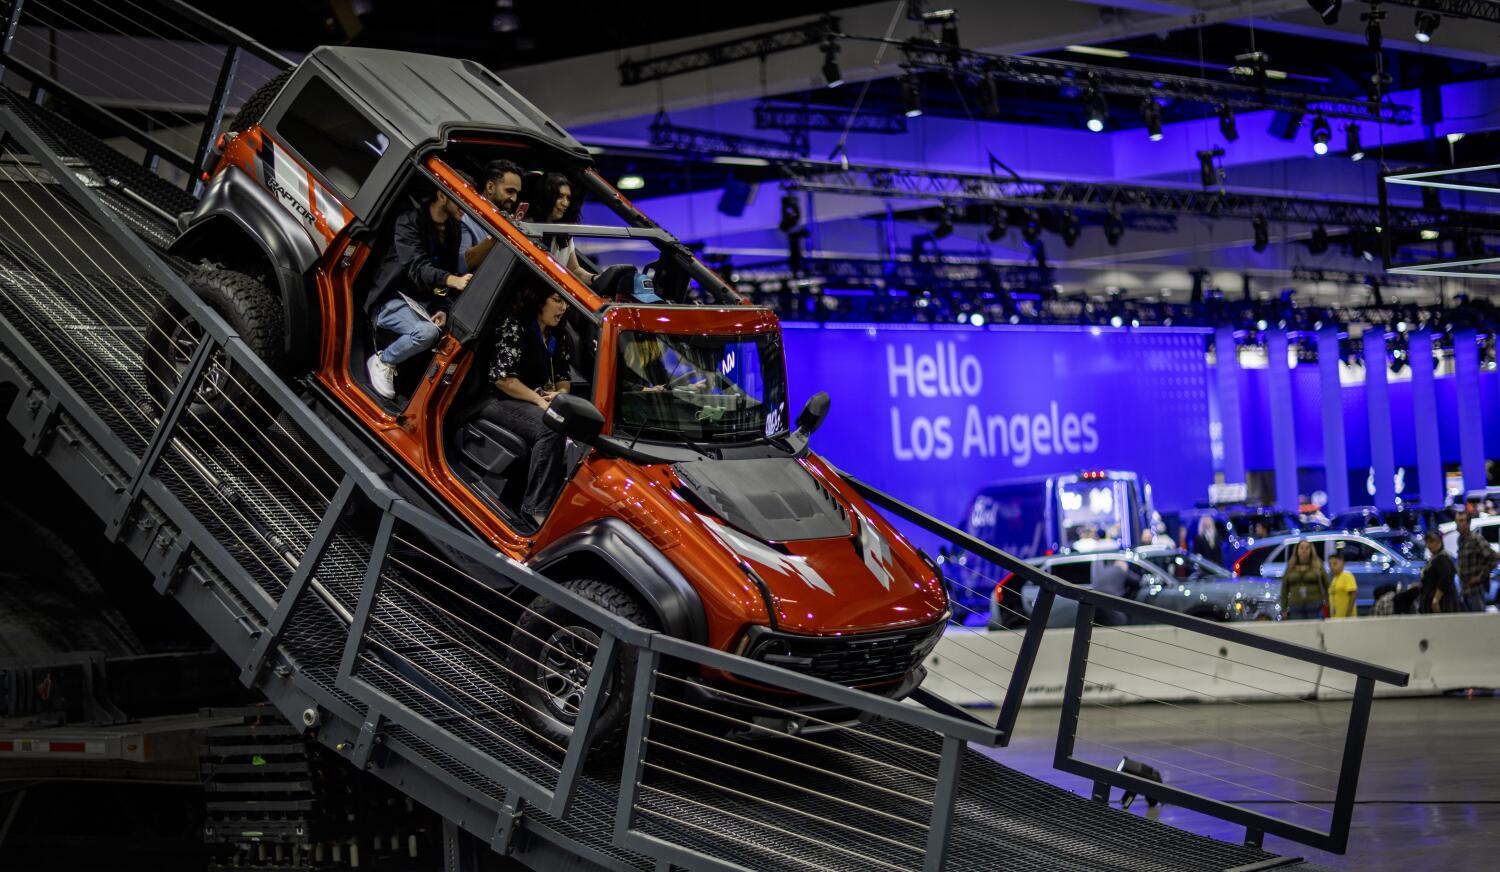 Photos: Car culture past, present and future on display at L.A. Auto Show